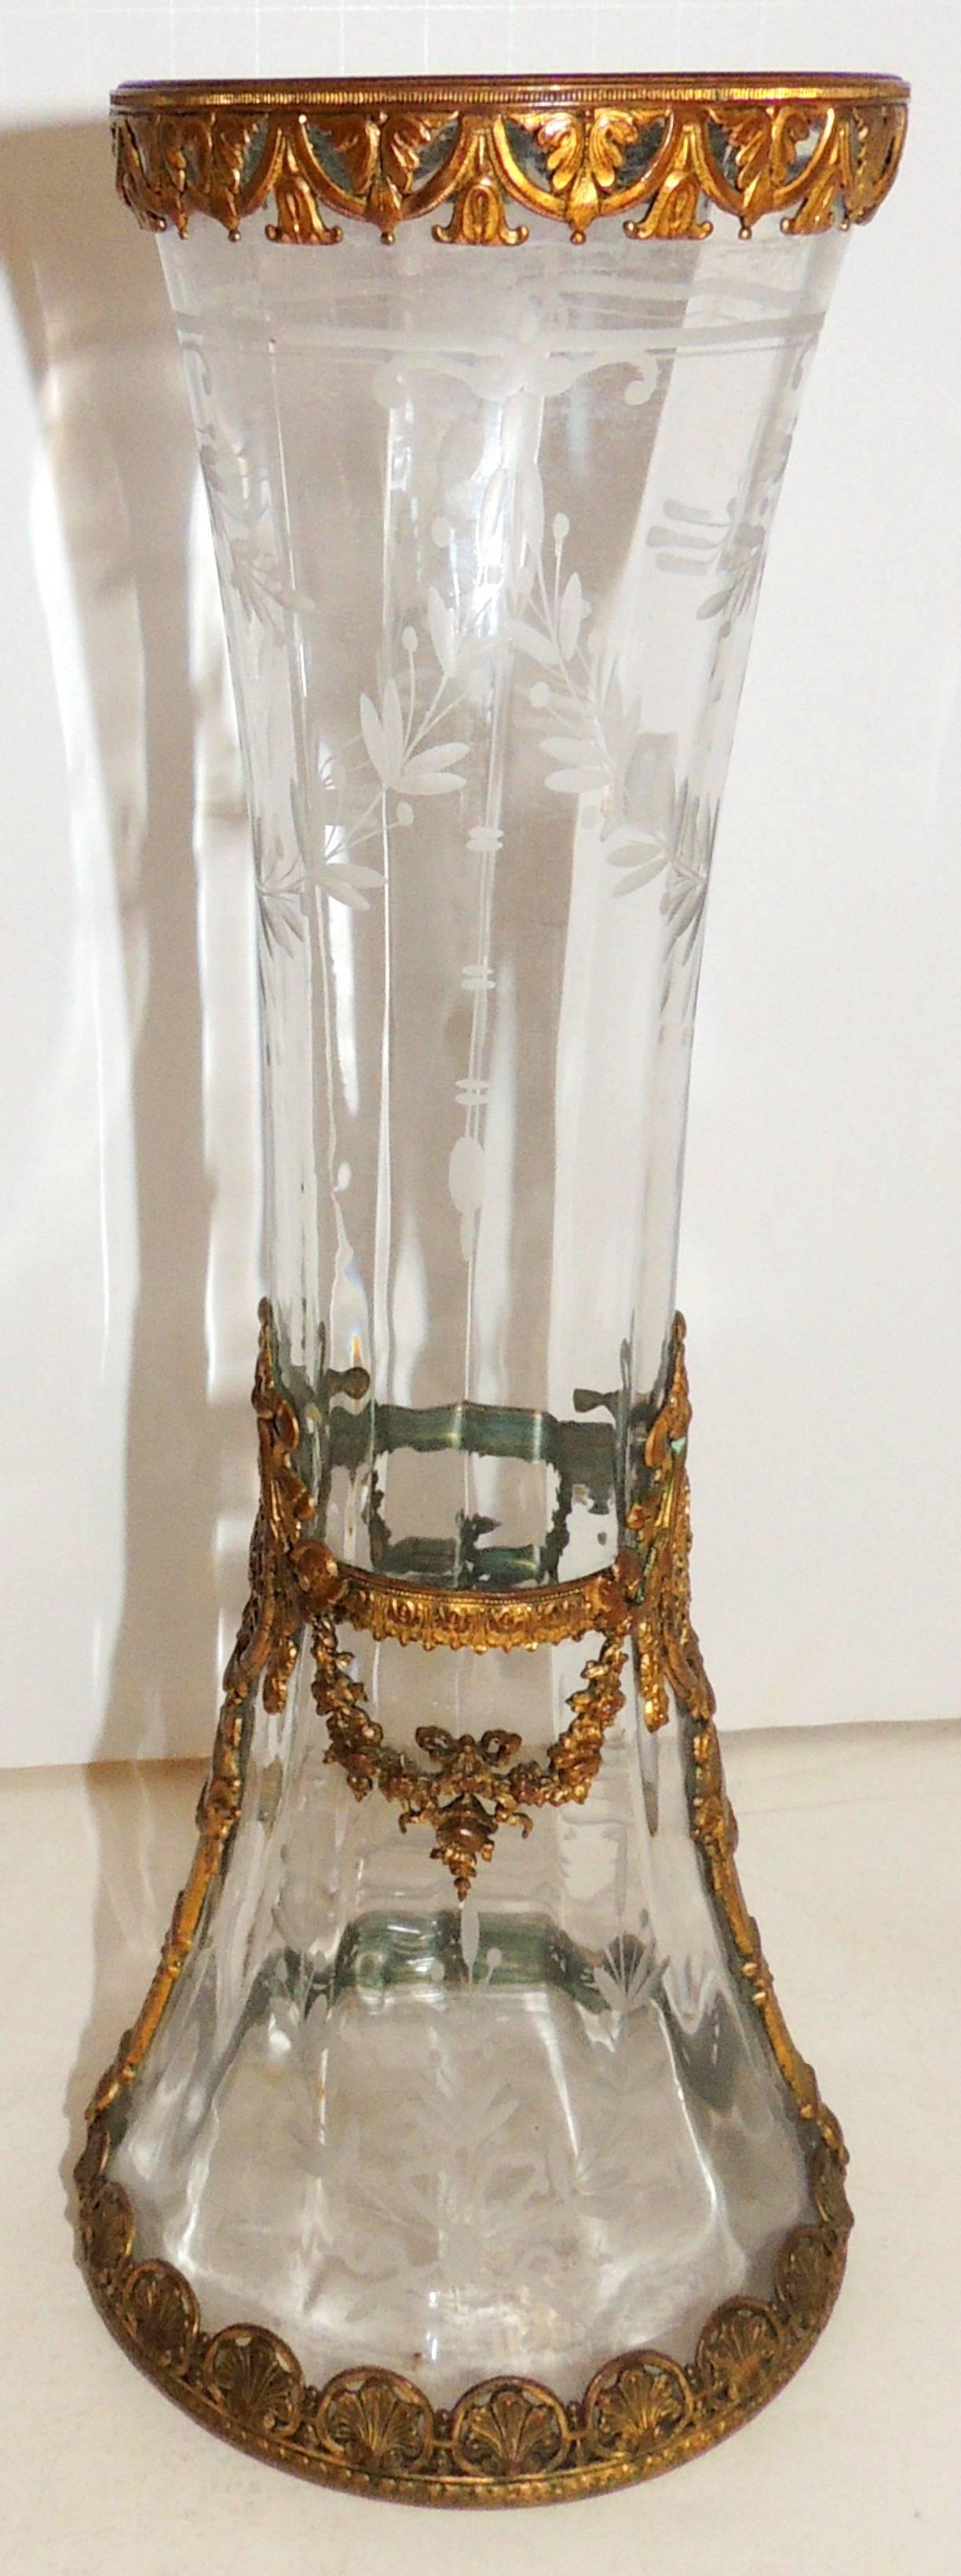 Mid-20th Century Wonderful French Etched Crystal Bows Garlands Gilt Dore Ormolu Bronze Vase For Sale